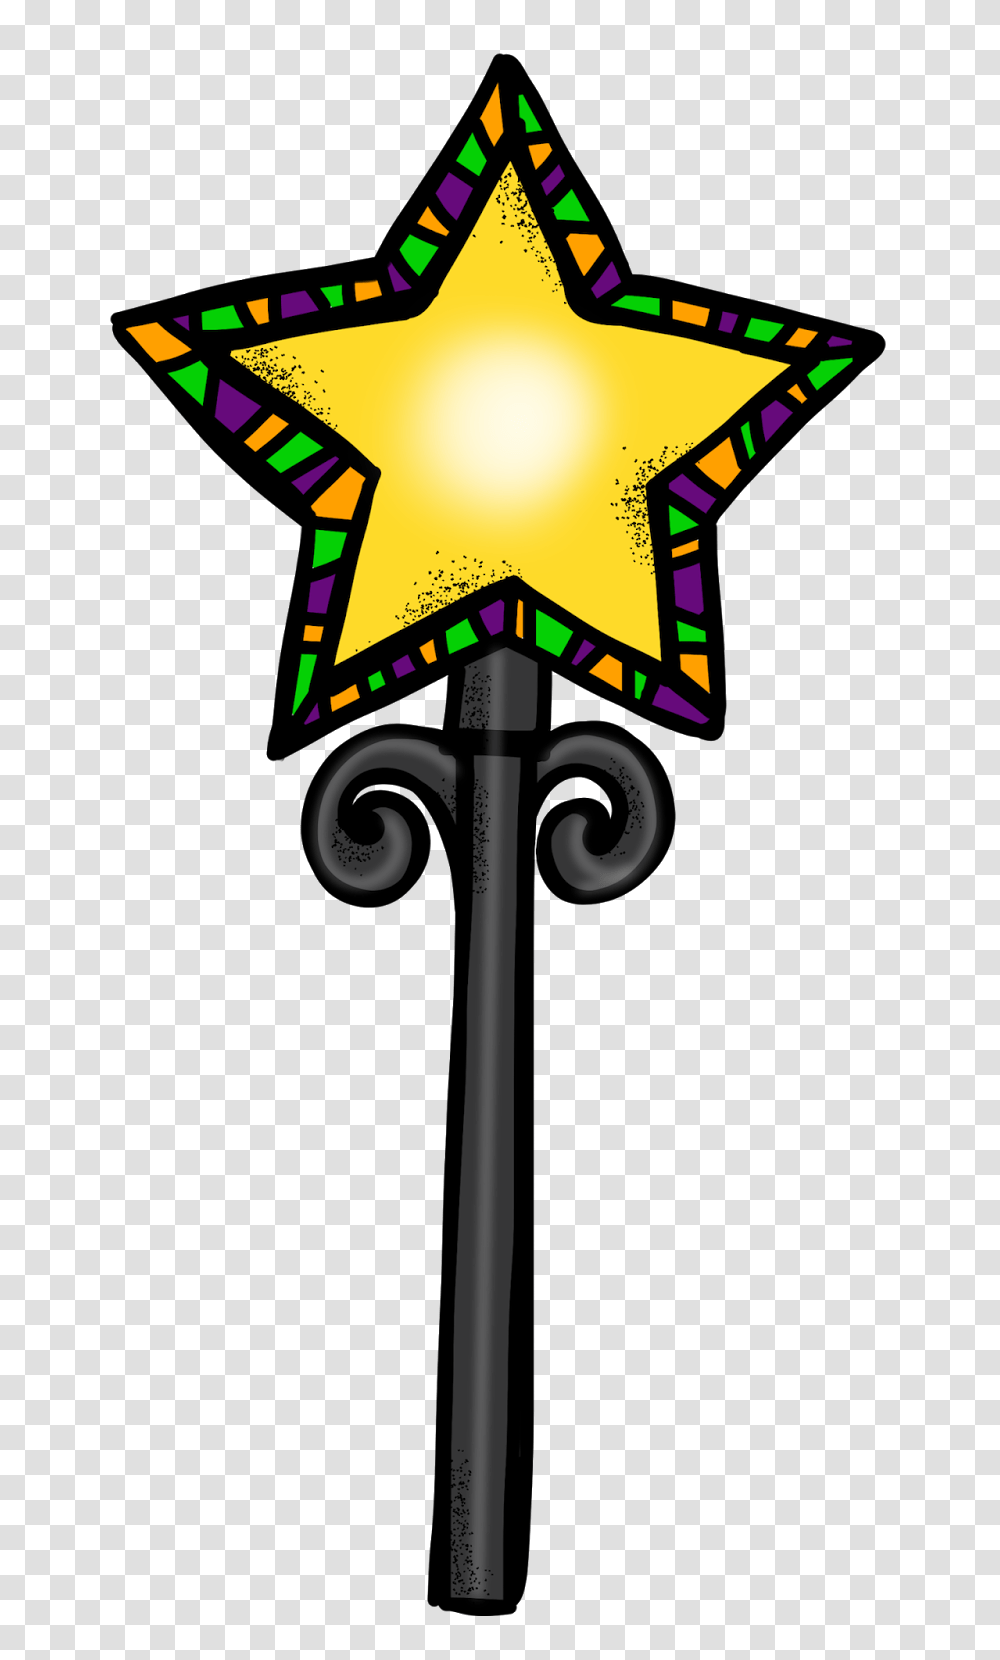 Candy Contest Update And Witchs Wand Clipart Freebies, Star Symbol, Utility Pole, Lamp Post Transparent Png